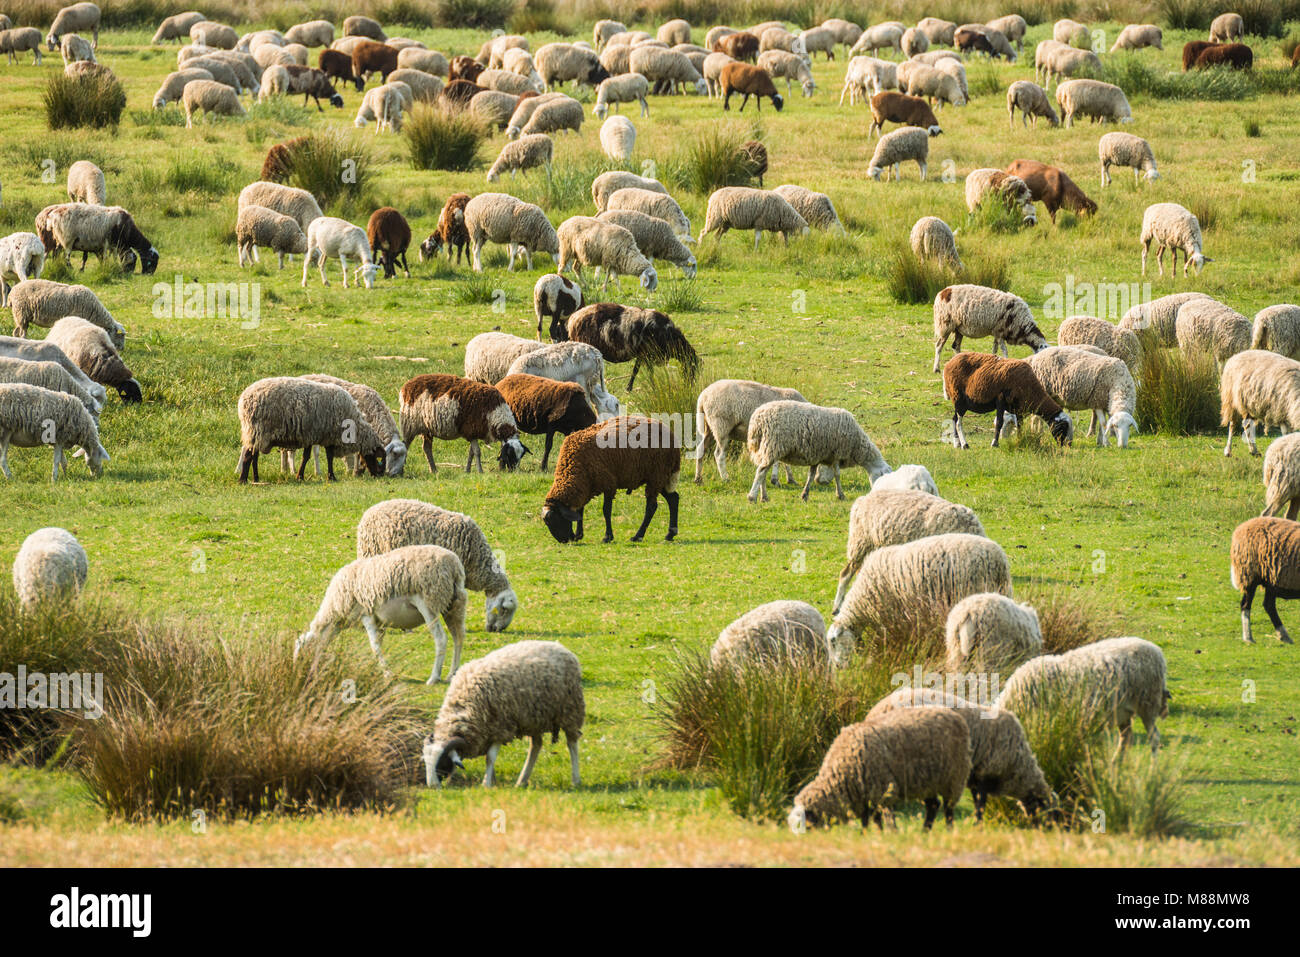 flock of black and white sheep on grass Stock Photo